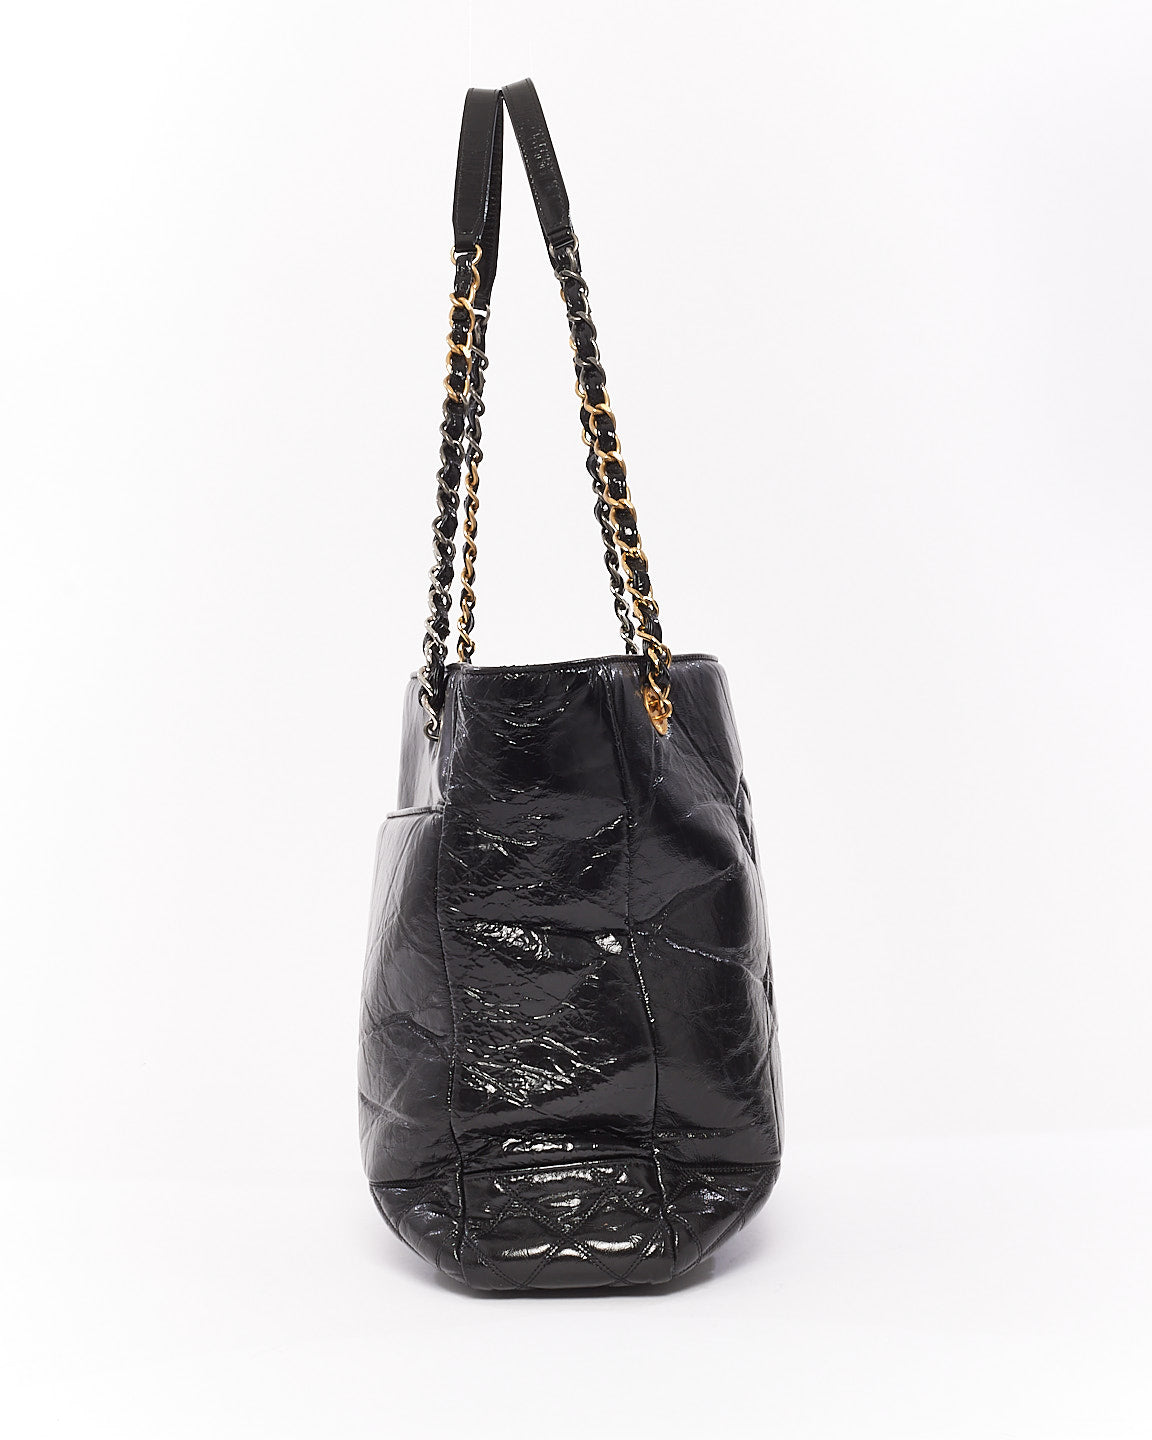 Chanel Black Leather Paris Rue Cambon Timeless Tote